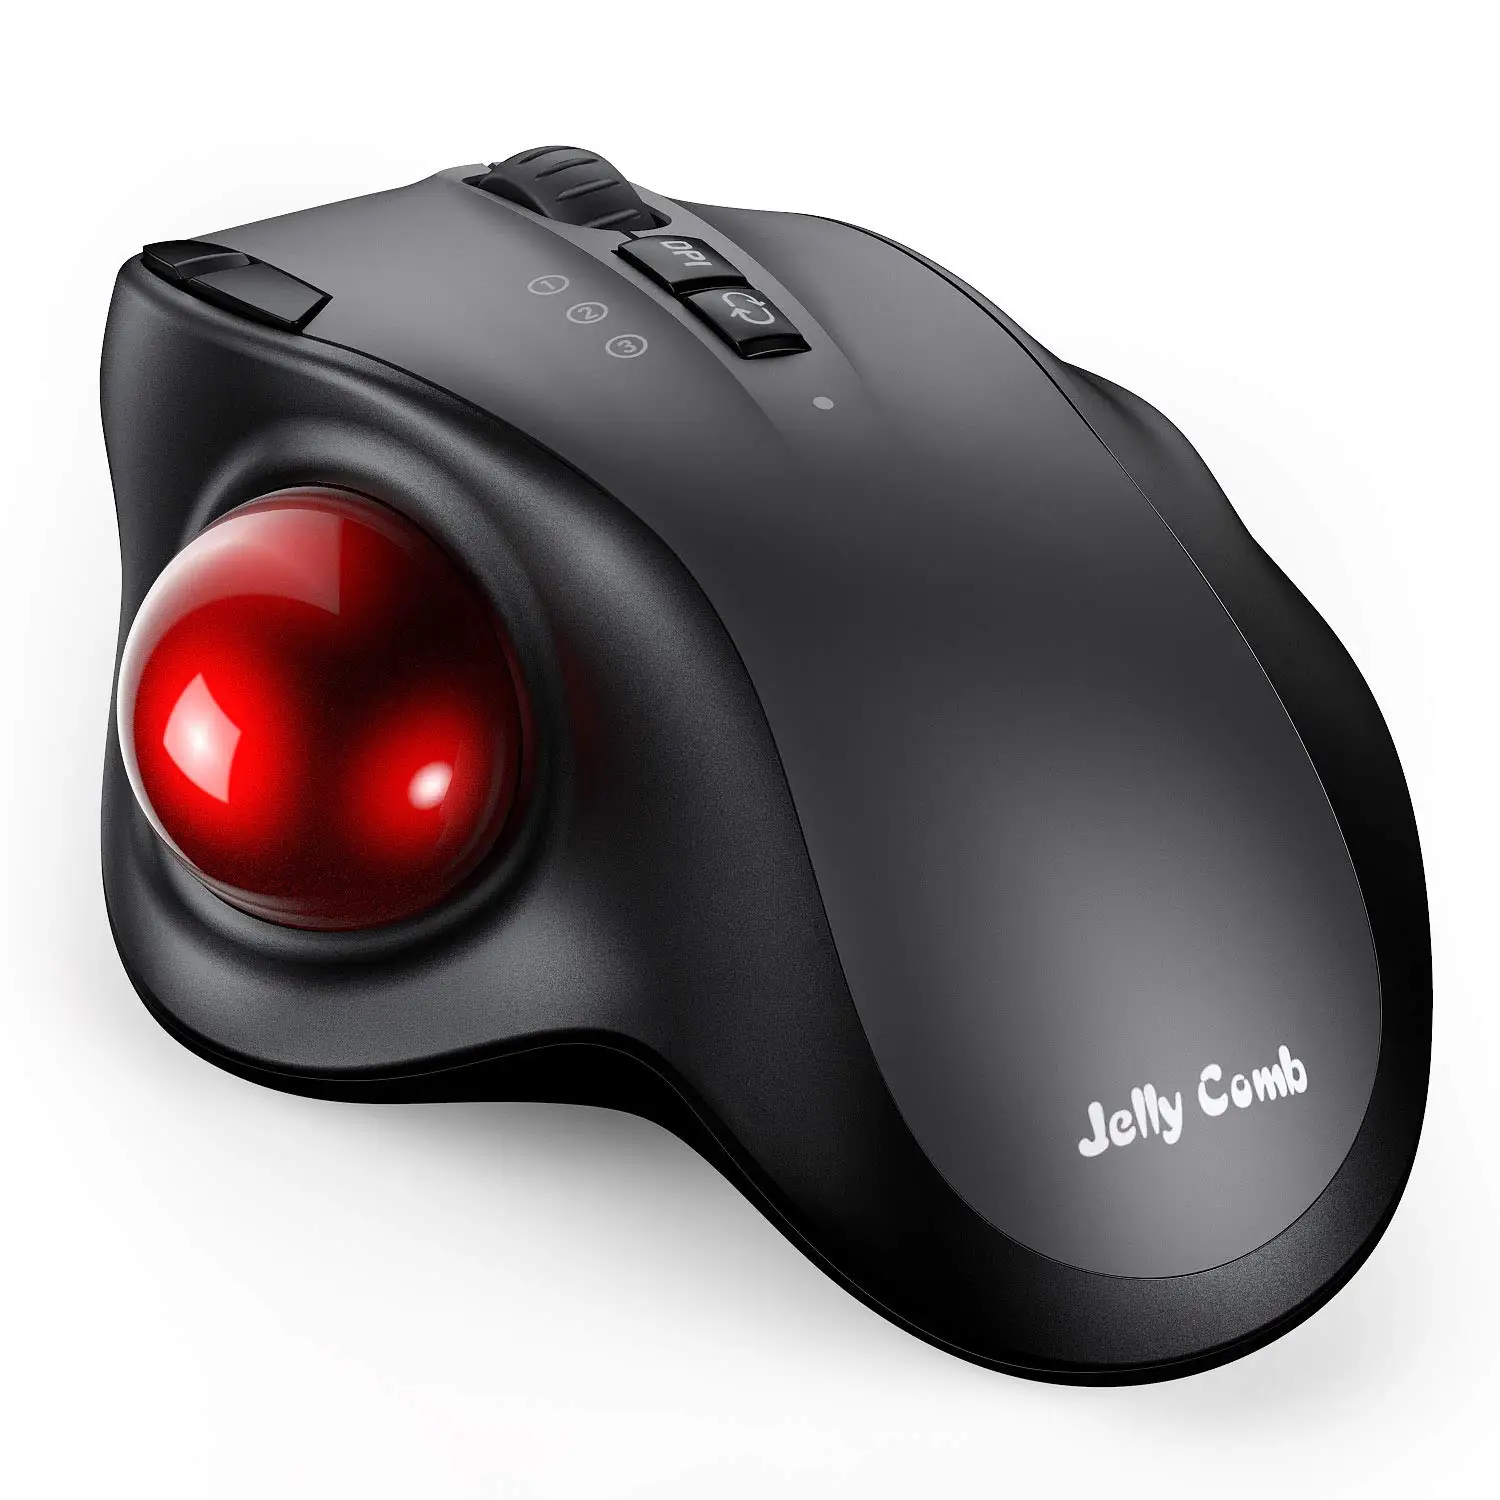 

2.4G USB Wireless Trackball Mice Rechargeable with USB-C Port and 3 DPI Laptop Computer Ergonomic Wireless Trackball Mouse